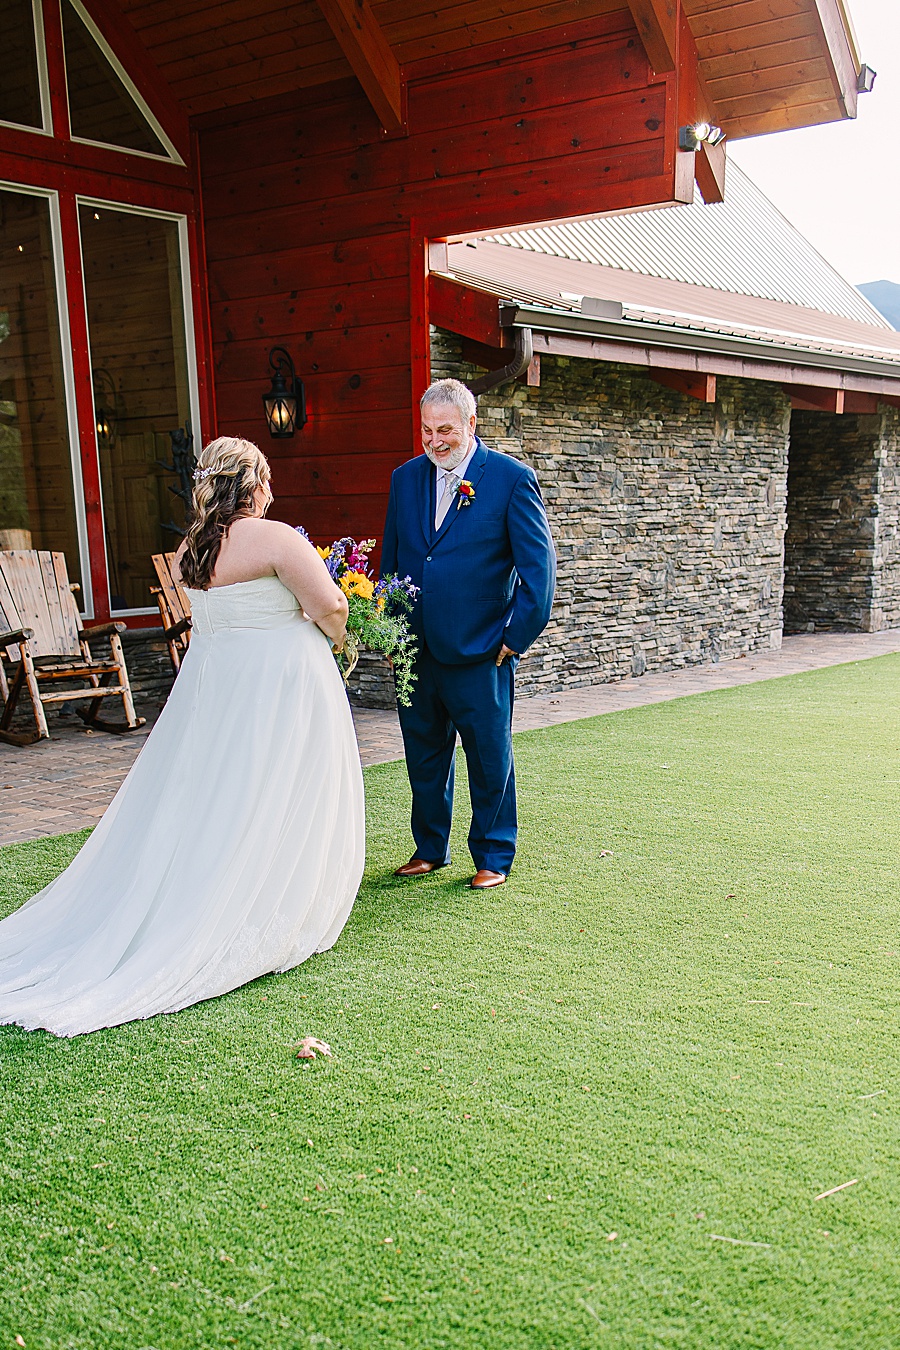 Daddy daughter first look at Venue at Greenbrier Estate by Mandy Hart Photo Knoxville Wedding photographer